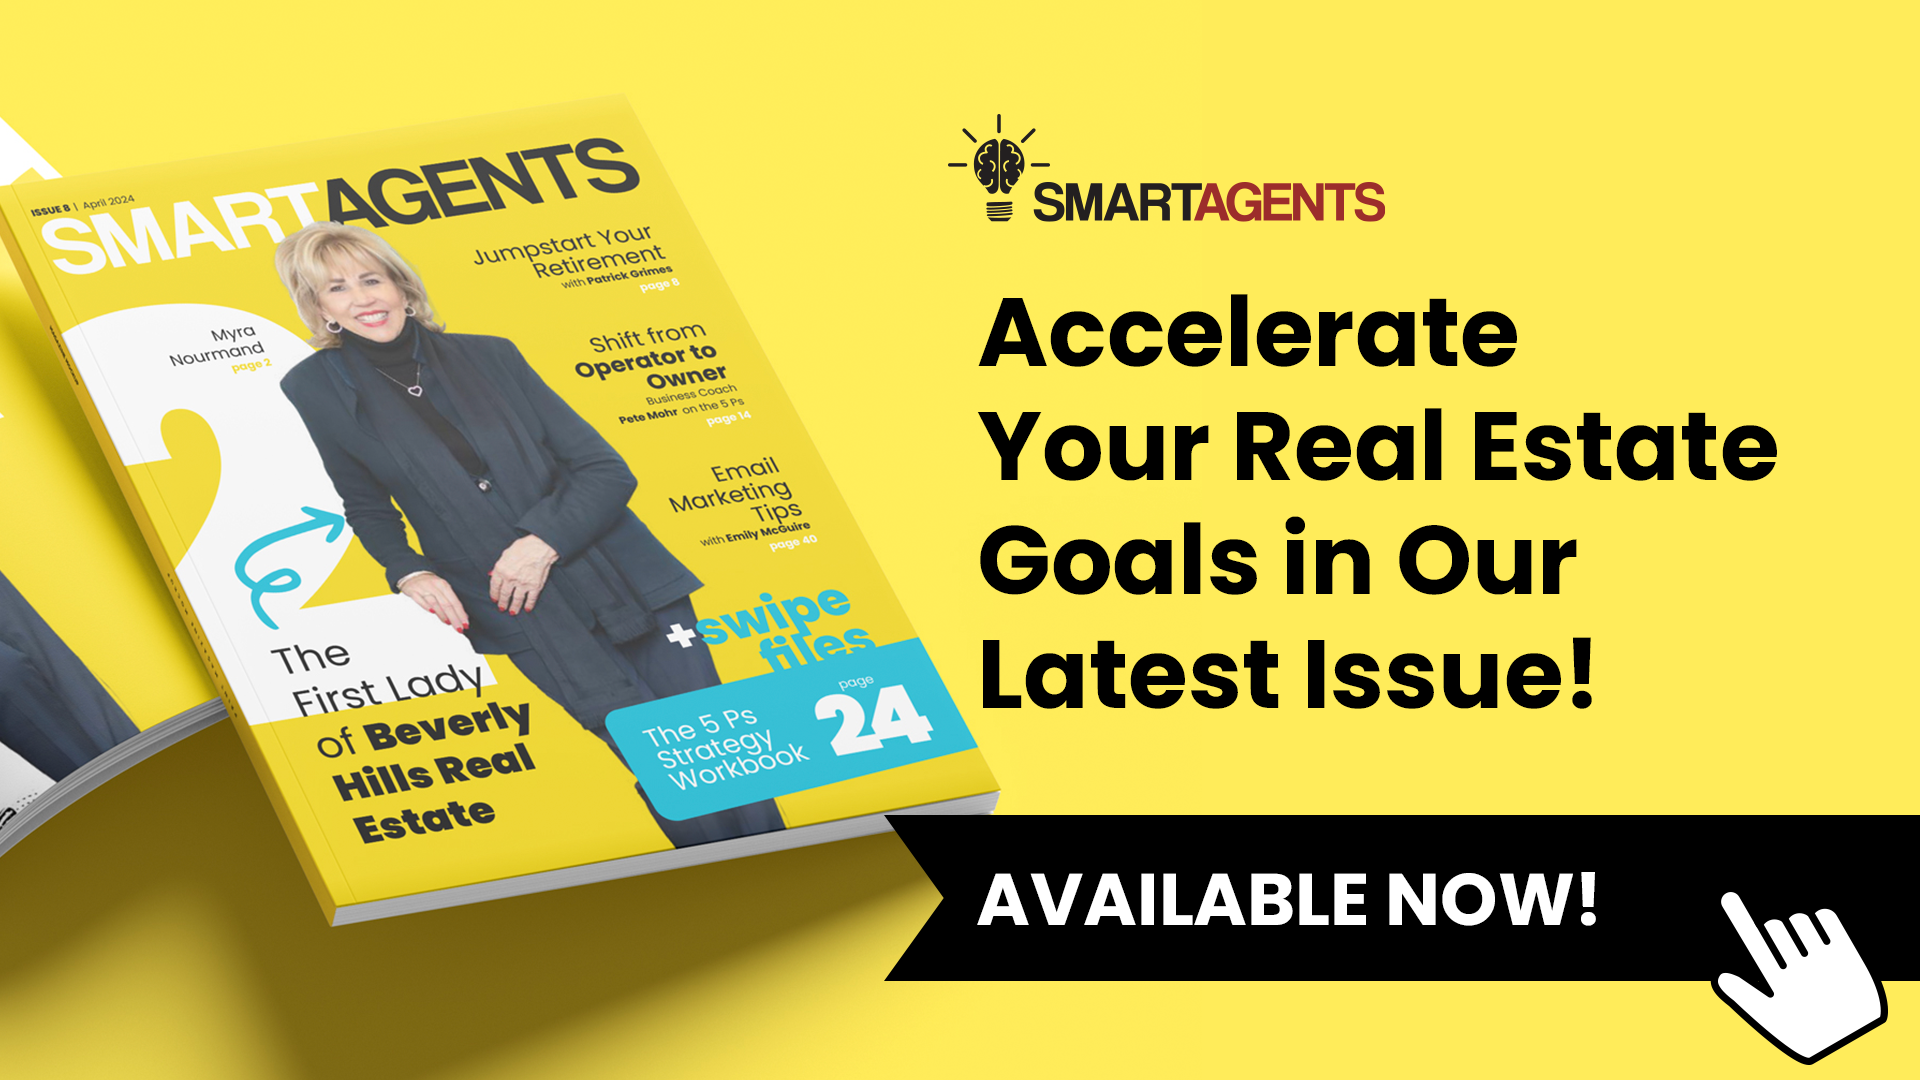 Fuel Your Growth with April's Smart Agents Magazine Edition!